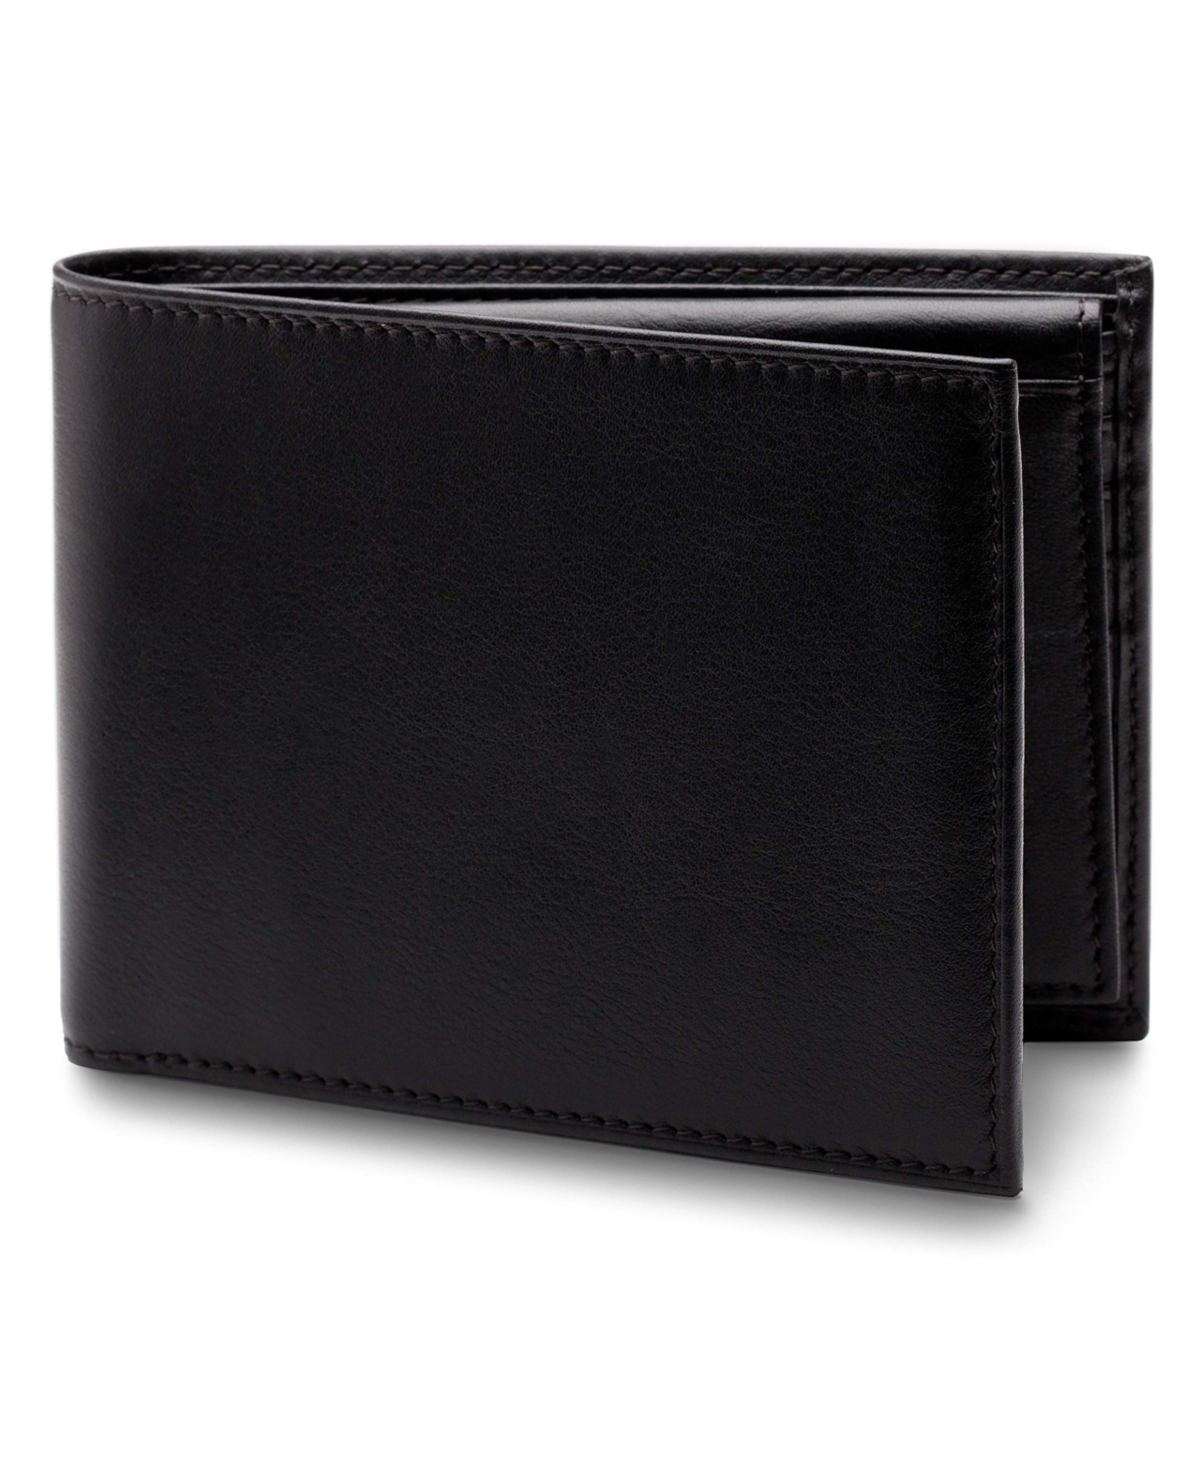 Nappa Vitello Collection-Credit Wallet w/Id Passcase - Black leather